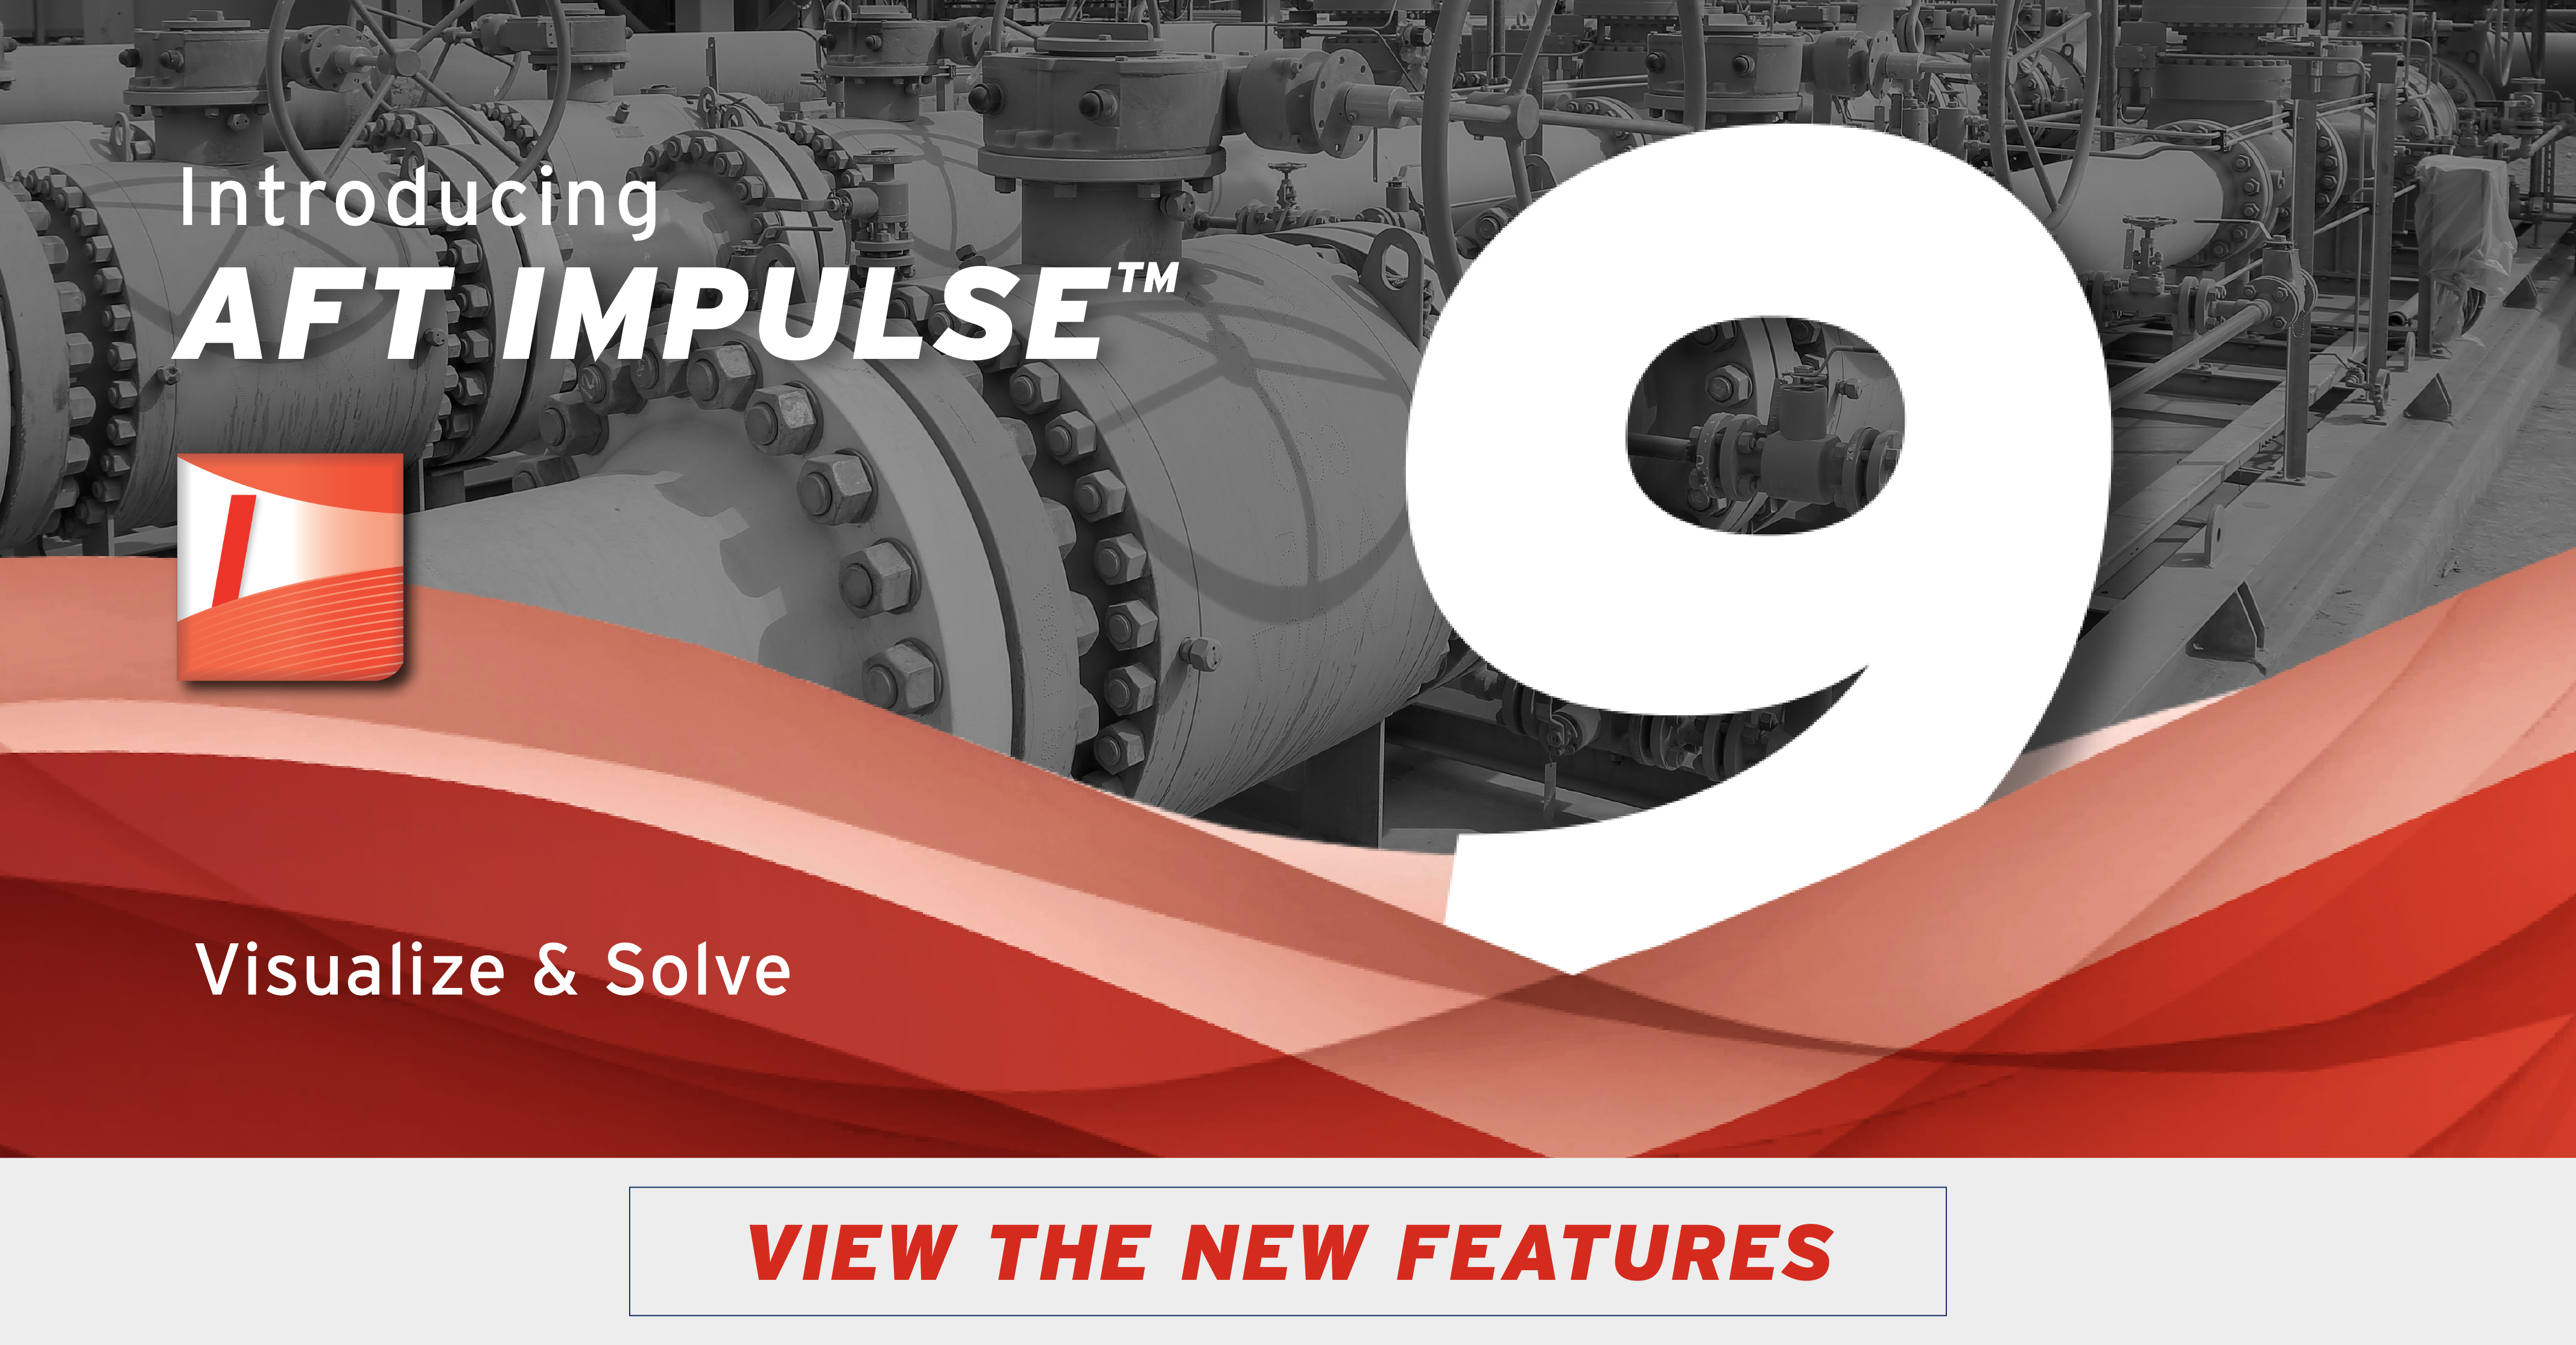 Learn More about AFT Impulse 9